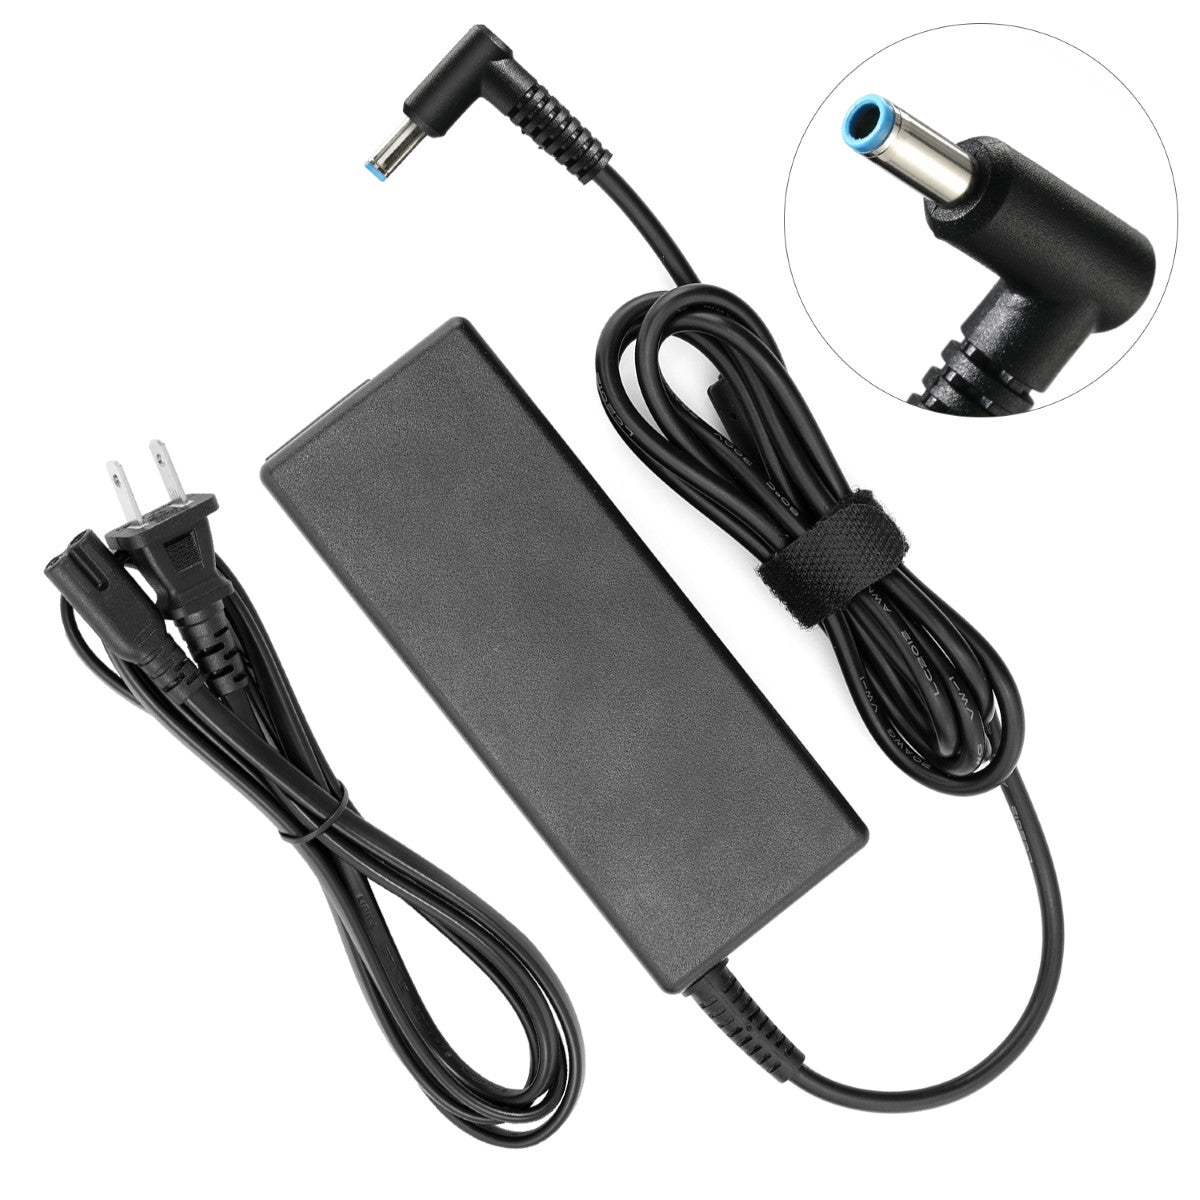 AC Adapter Charger for HP Pavilion Touchsmart 17-f019wm Notebook.